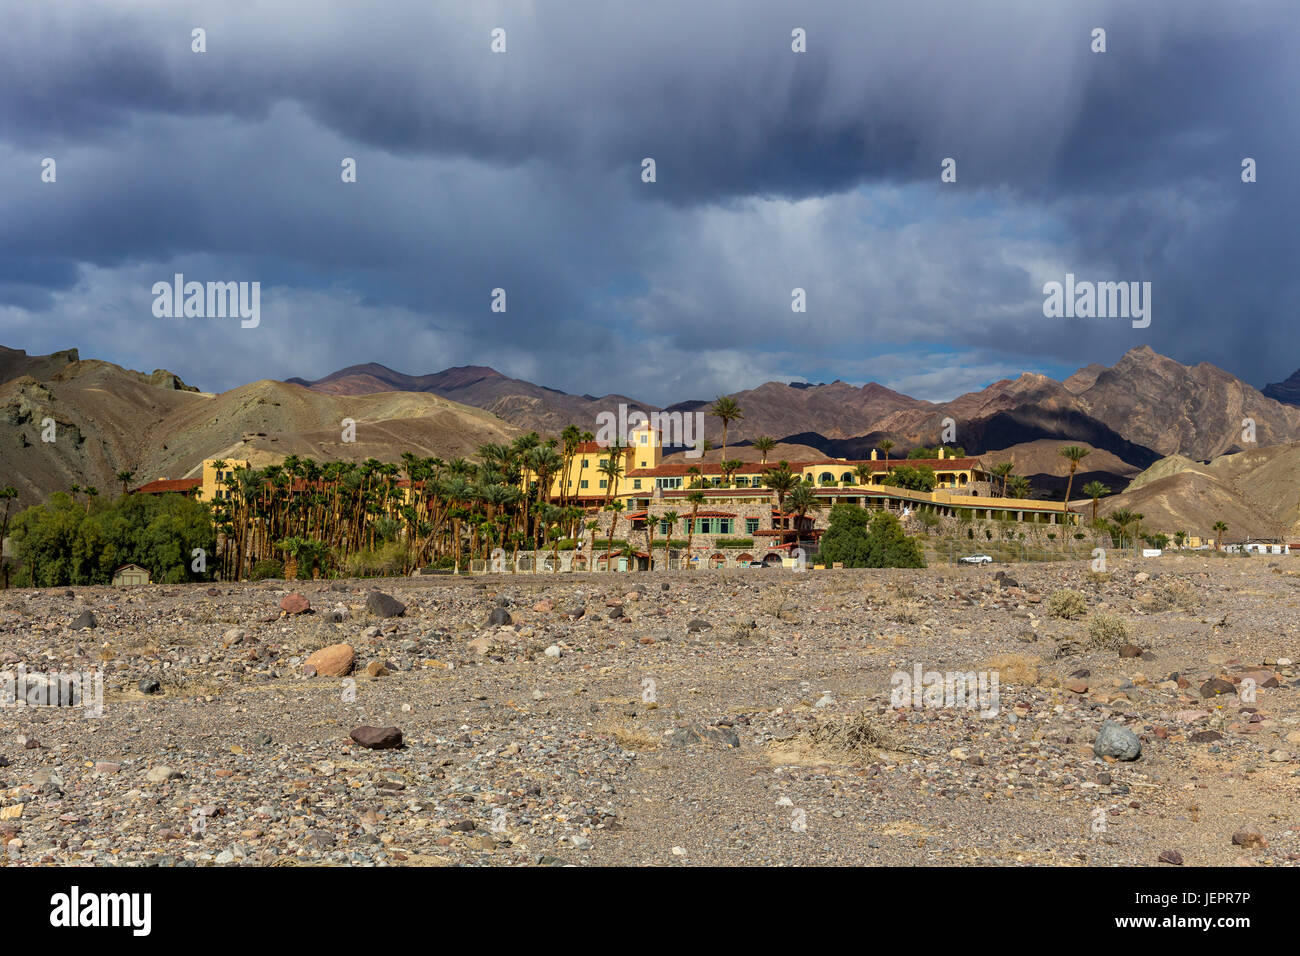 Furnace Creek Inn, historic hotel, built by Pacific Coast Borax Company, opened 1927, Death Valley National Park, Death Valley, California Stock Photo